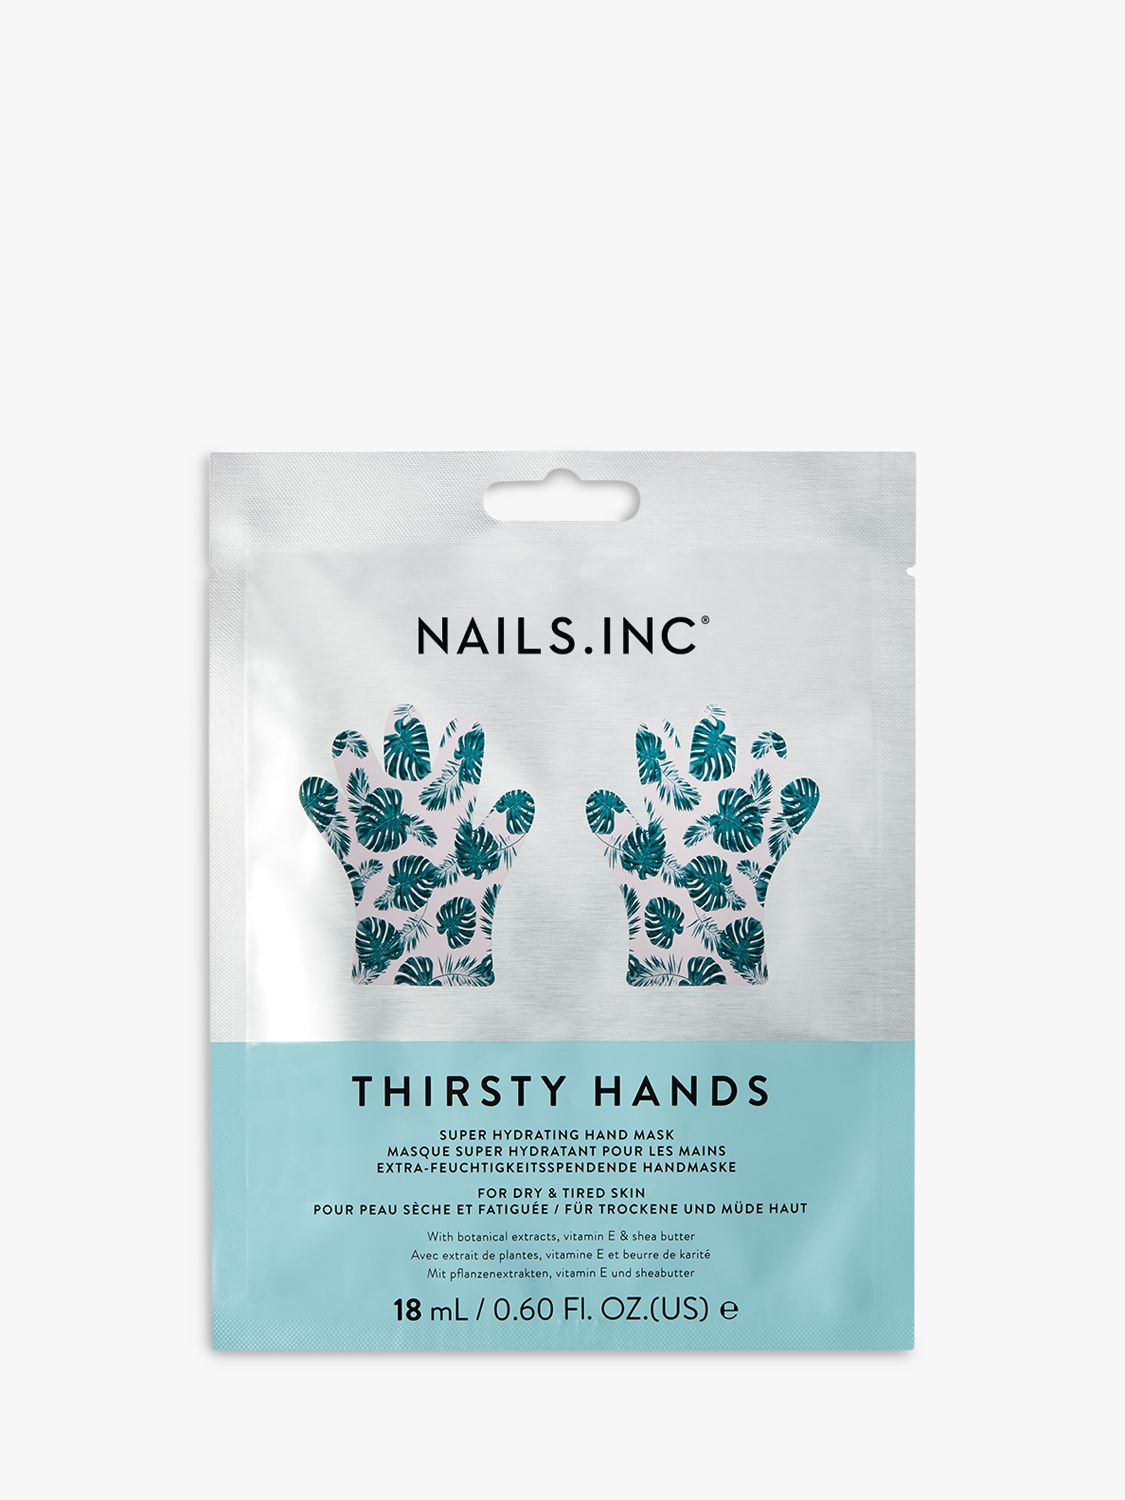 Nails Inc Thirsty Hands Super Hydrating Hand Mask, 18ml 1